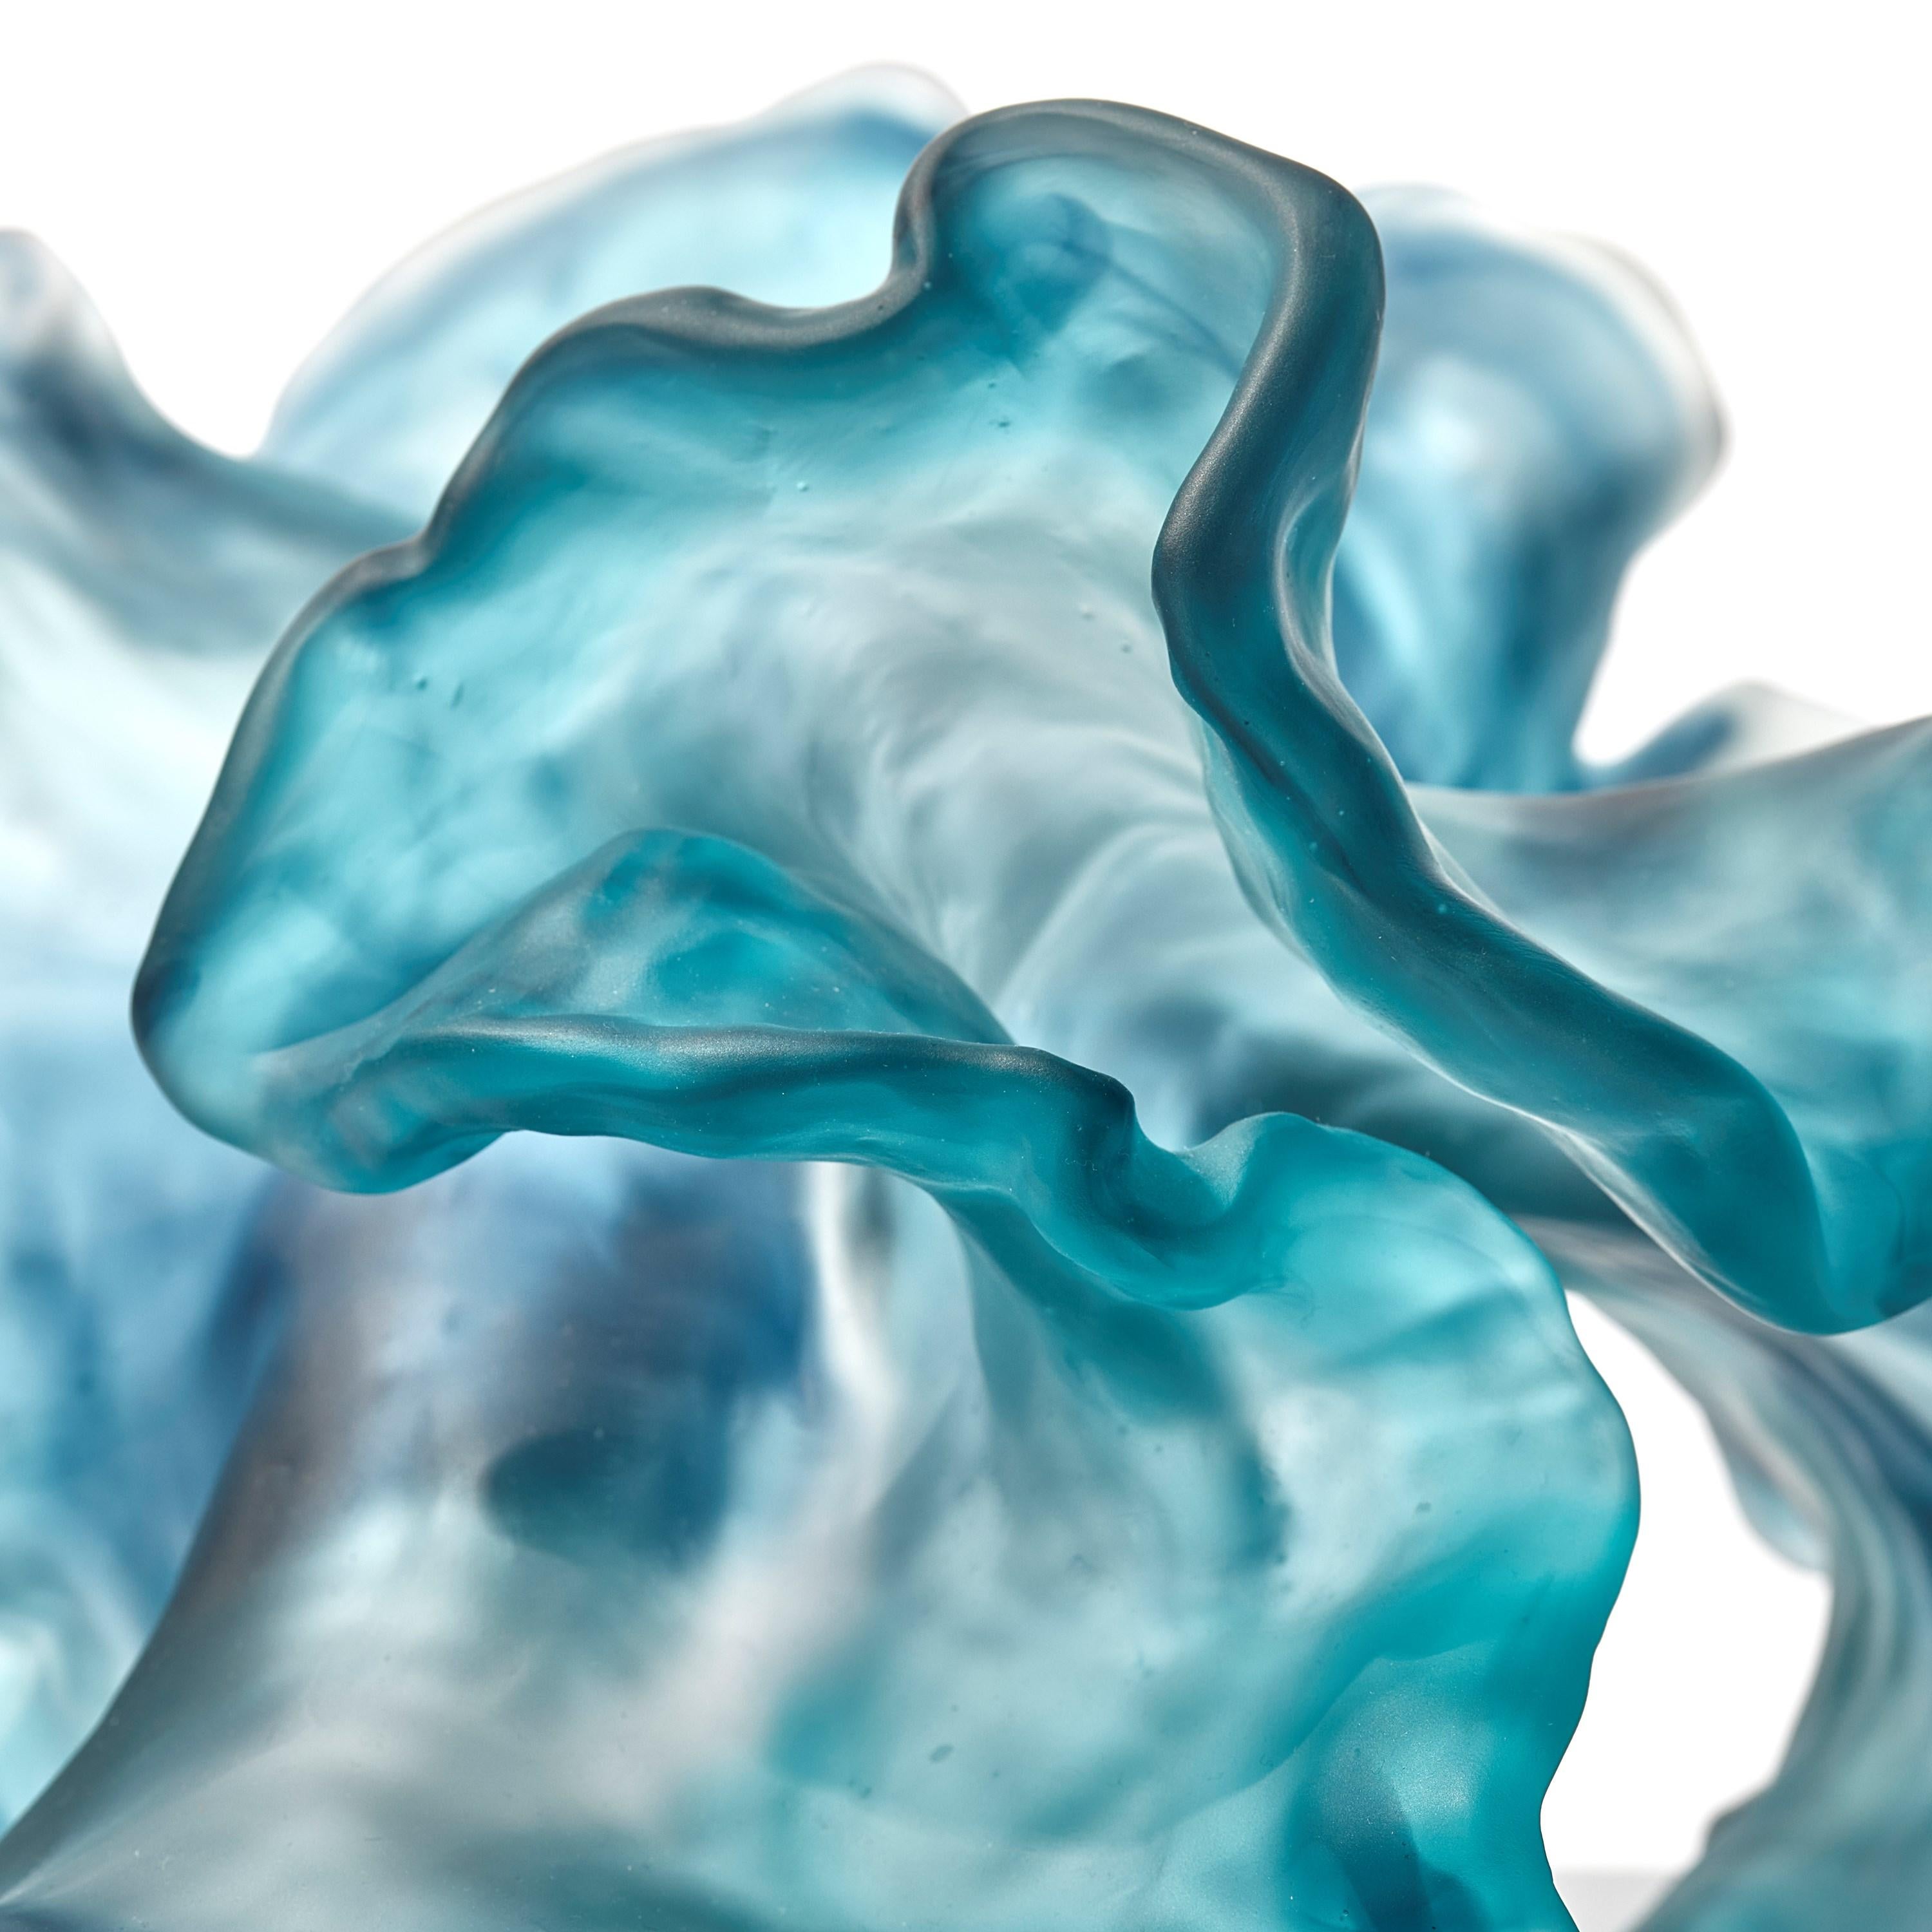 Contemporary Floating Twist, teal blue cast glass ethereal organic artwork by Monette Larsen For Sale